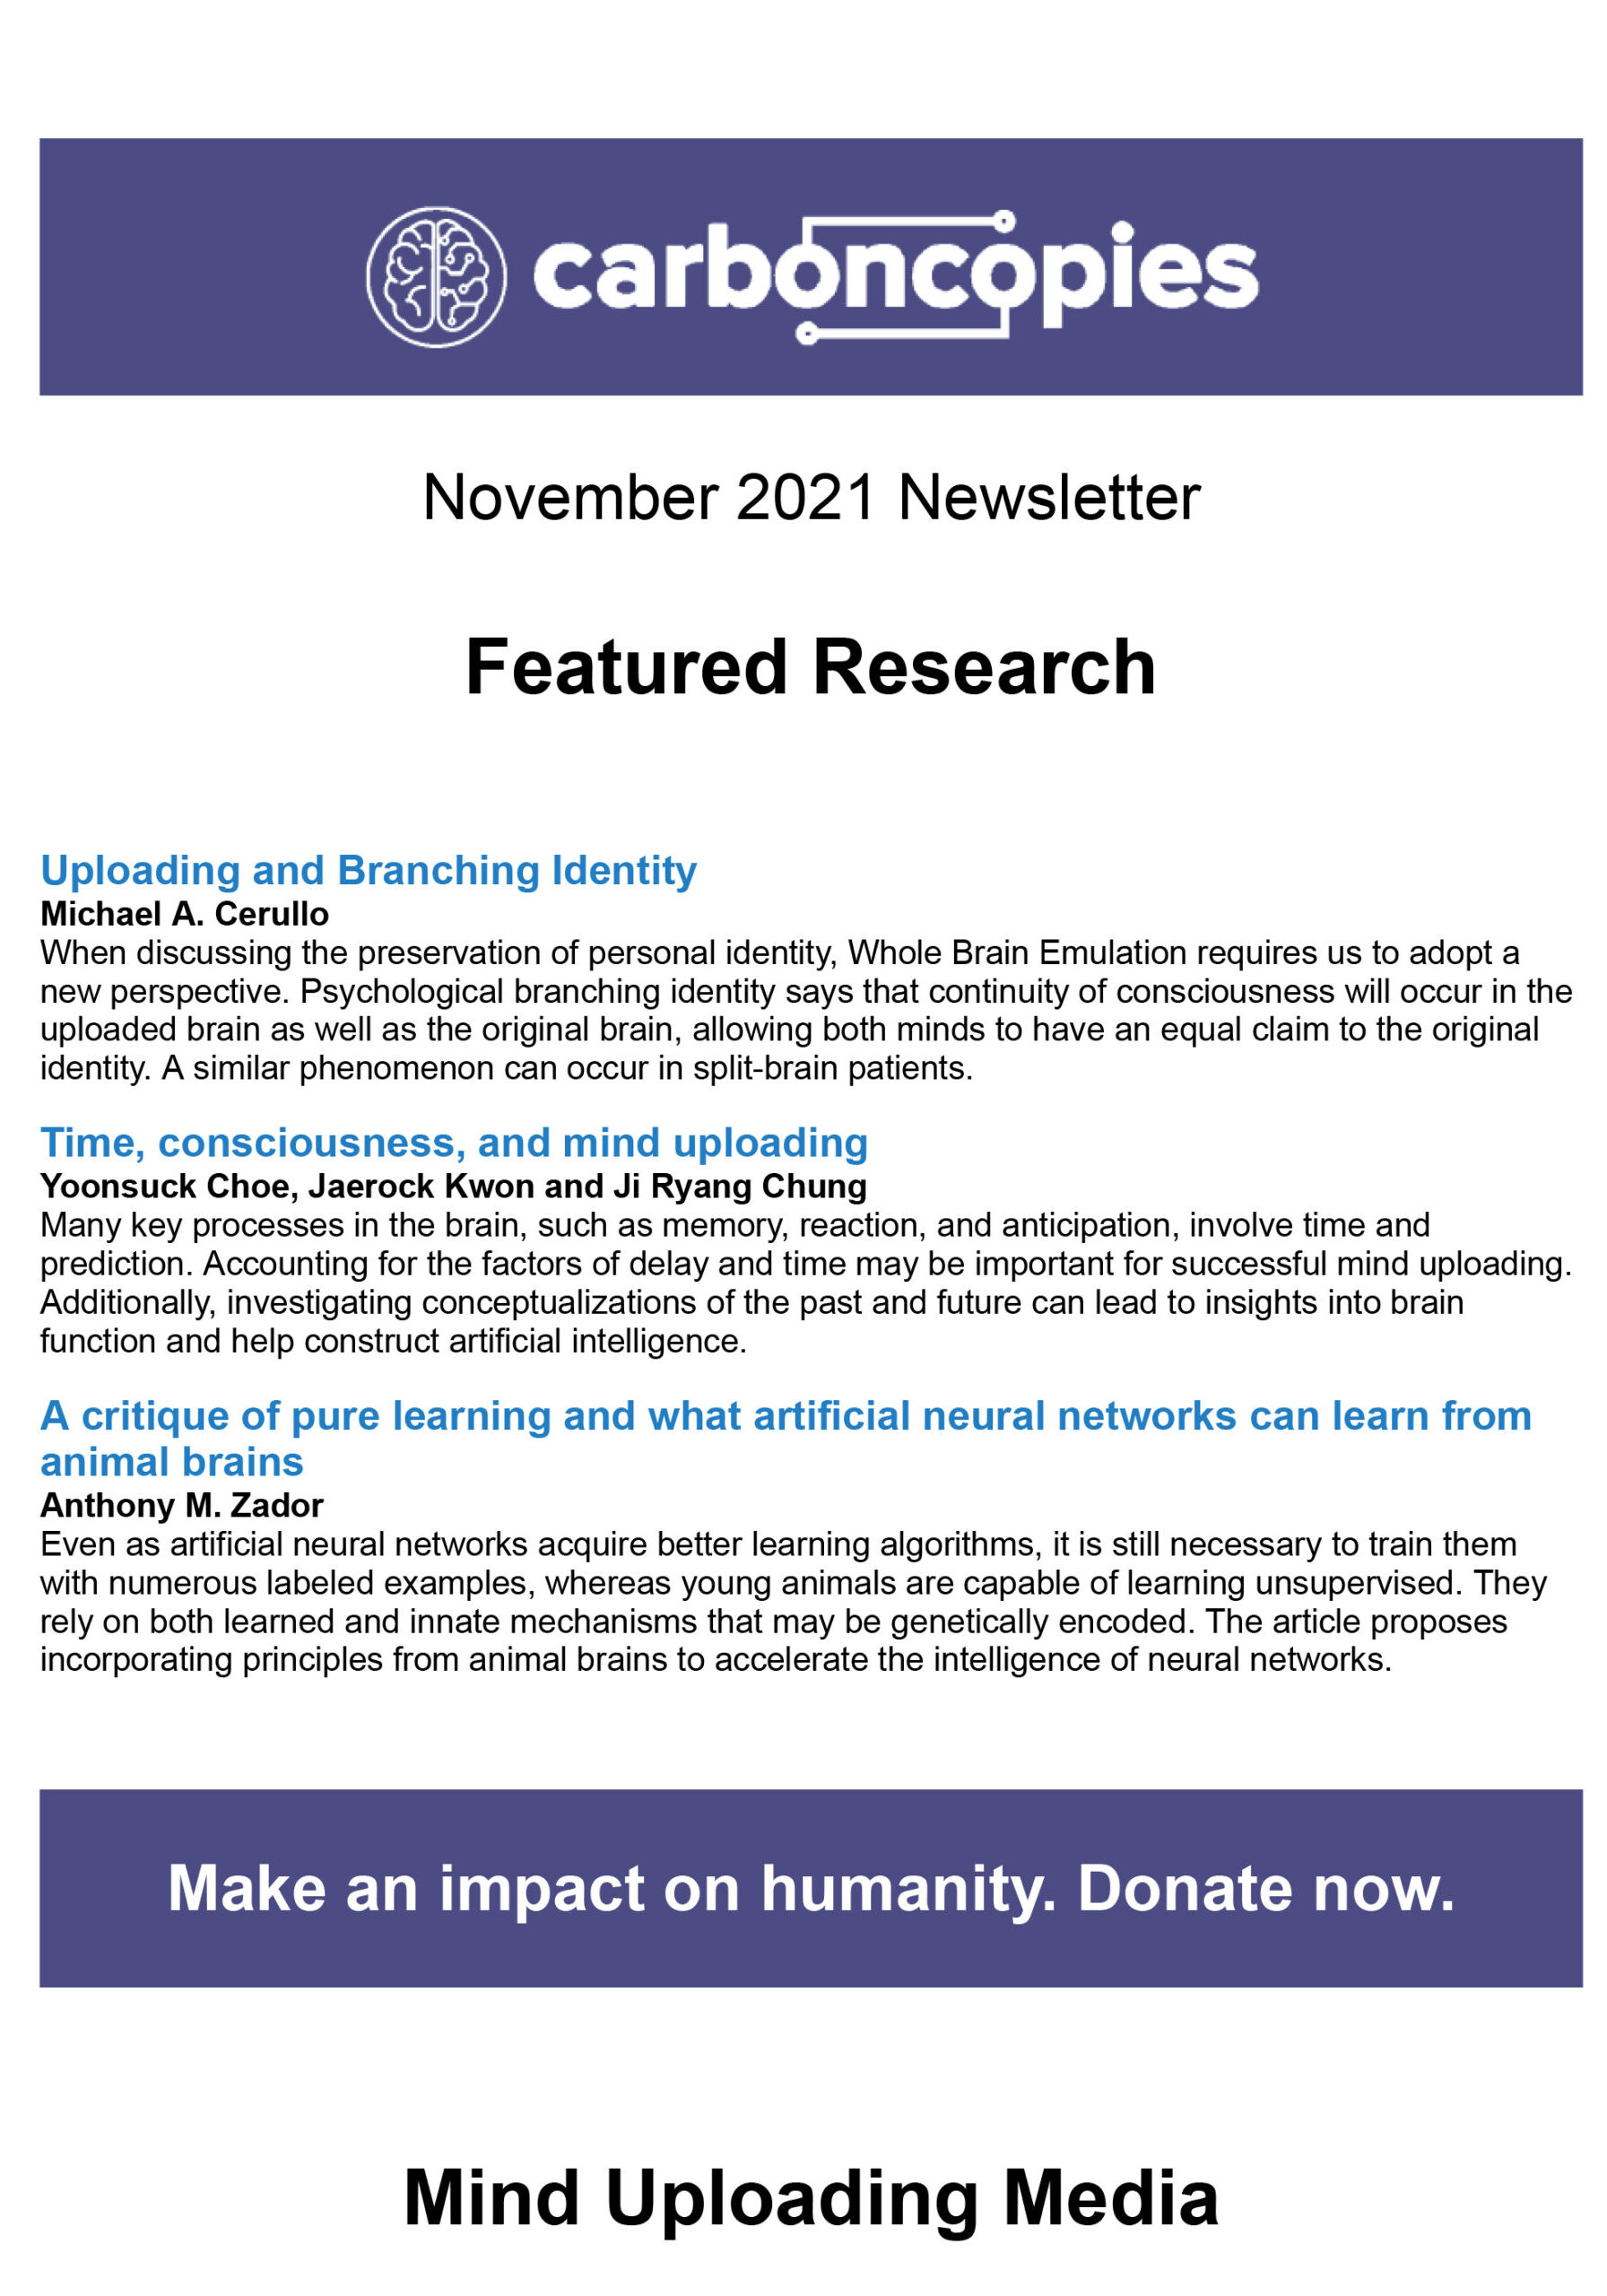 Carboncopies Foundation for Substrate-Independent Minds, Inc. Mail - Carboncopies November 2021 Newsletter-1 copy